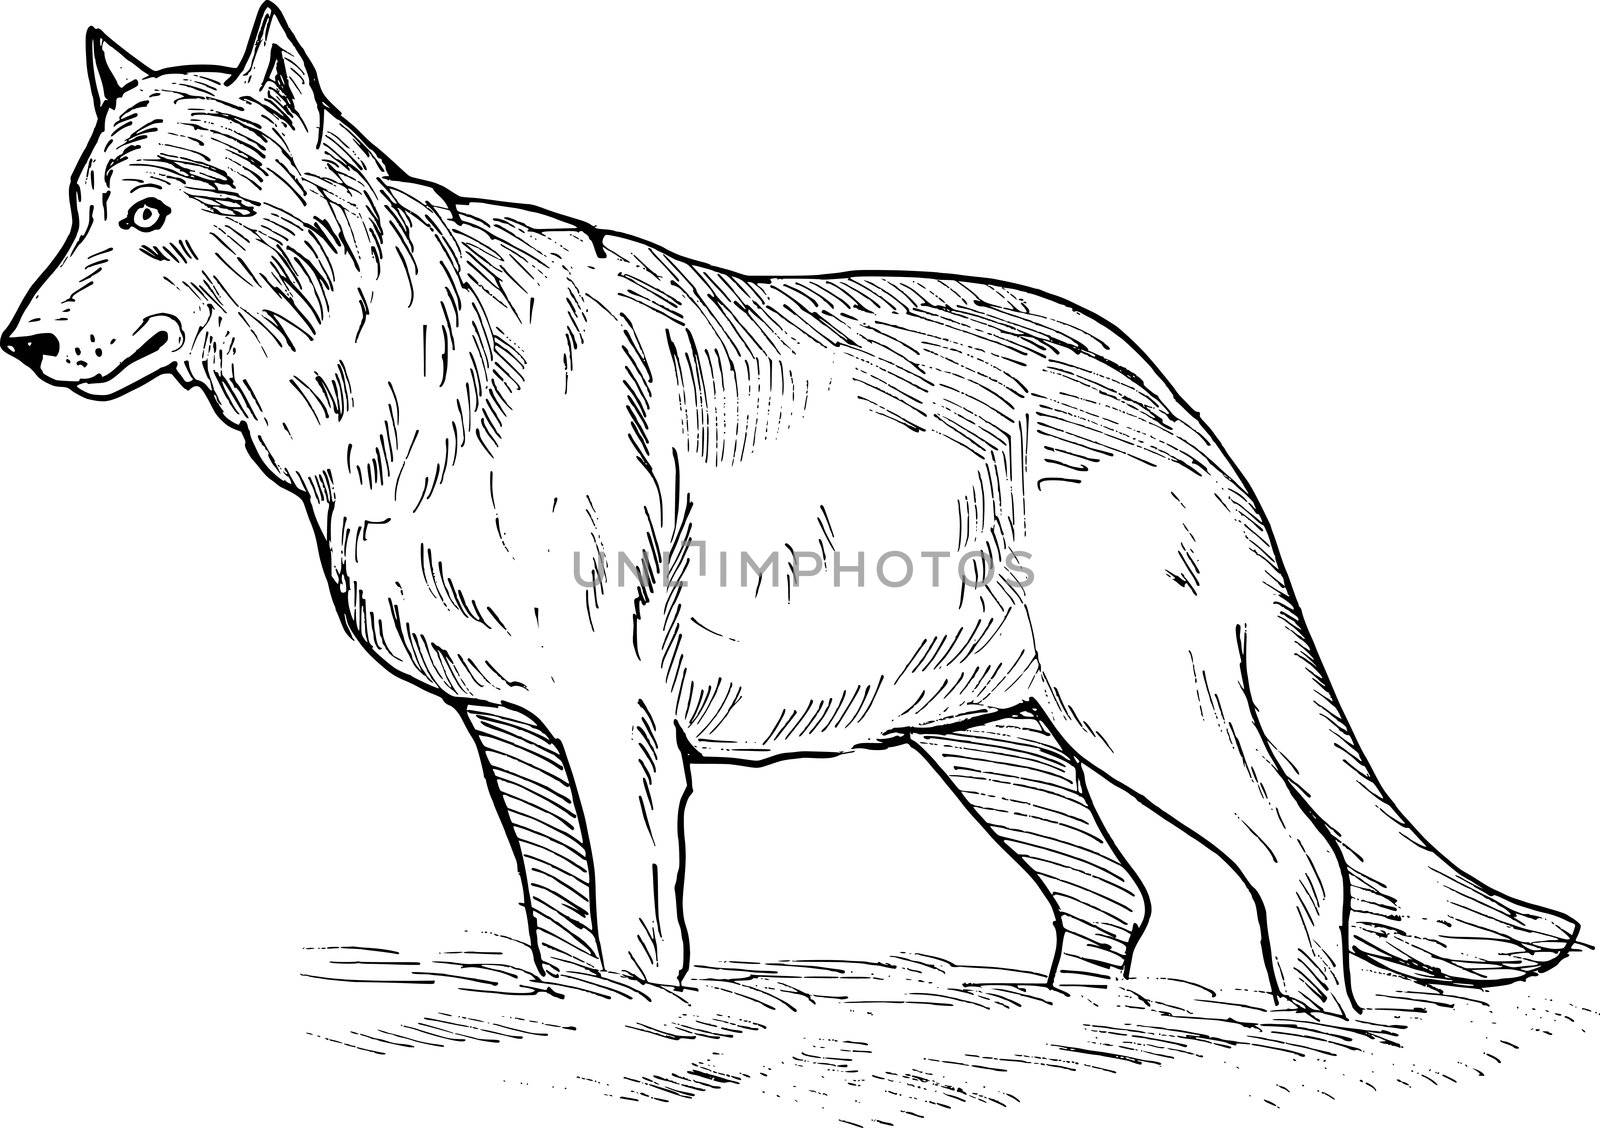 hand sketch drawing illustration of a grey wolf